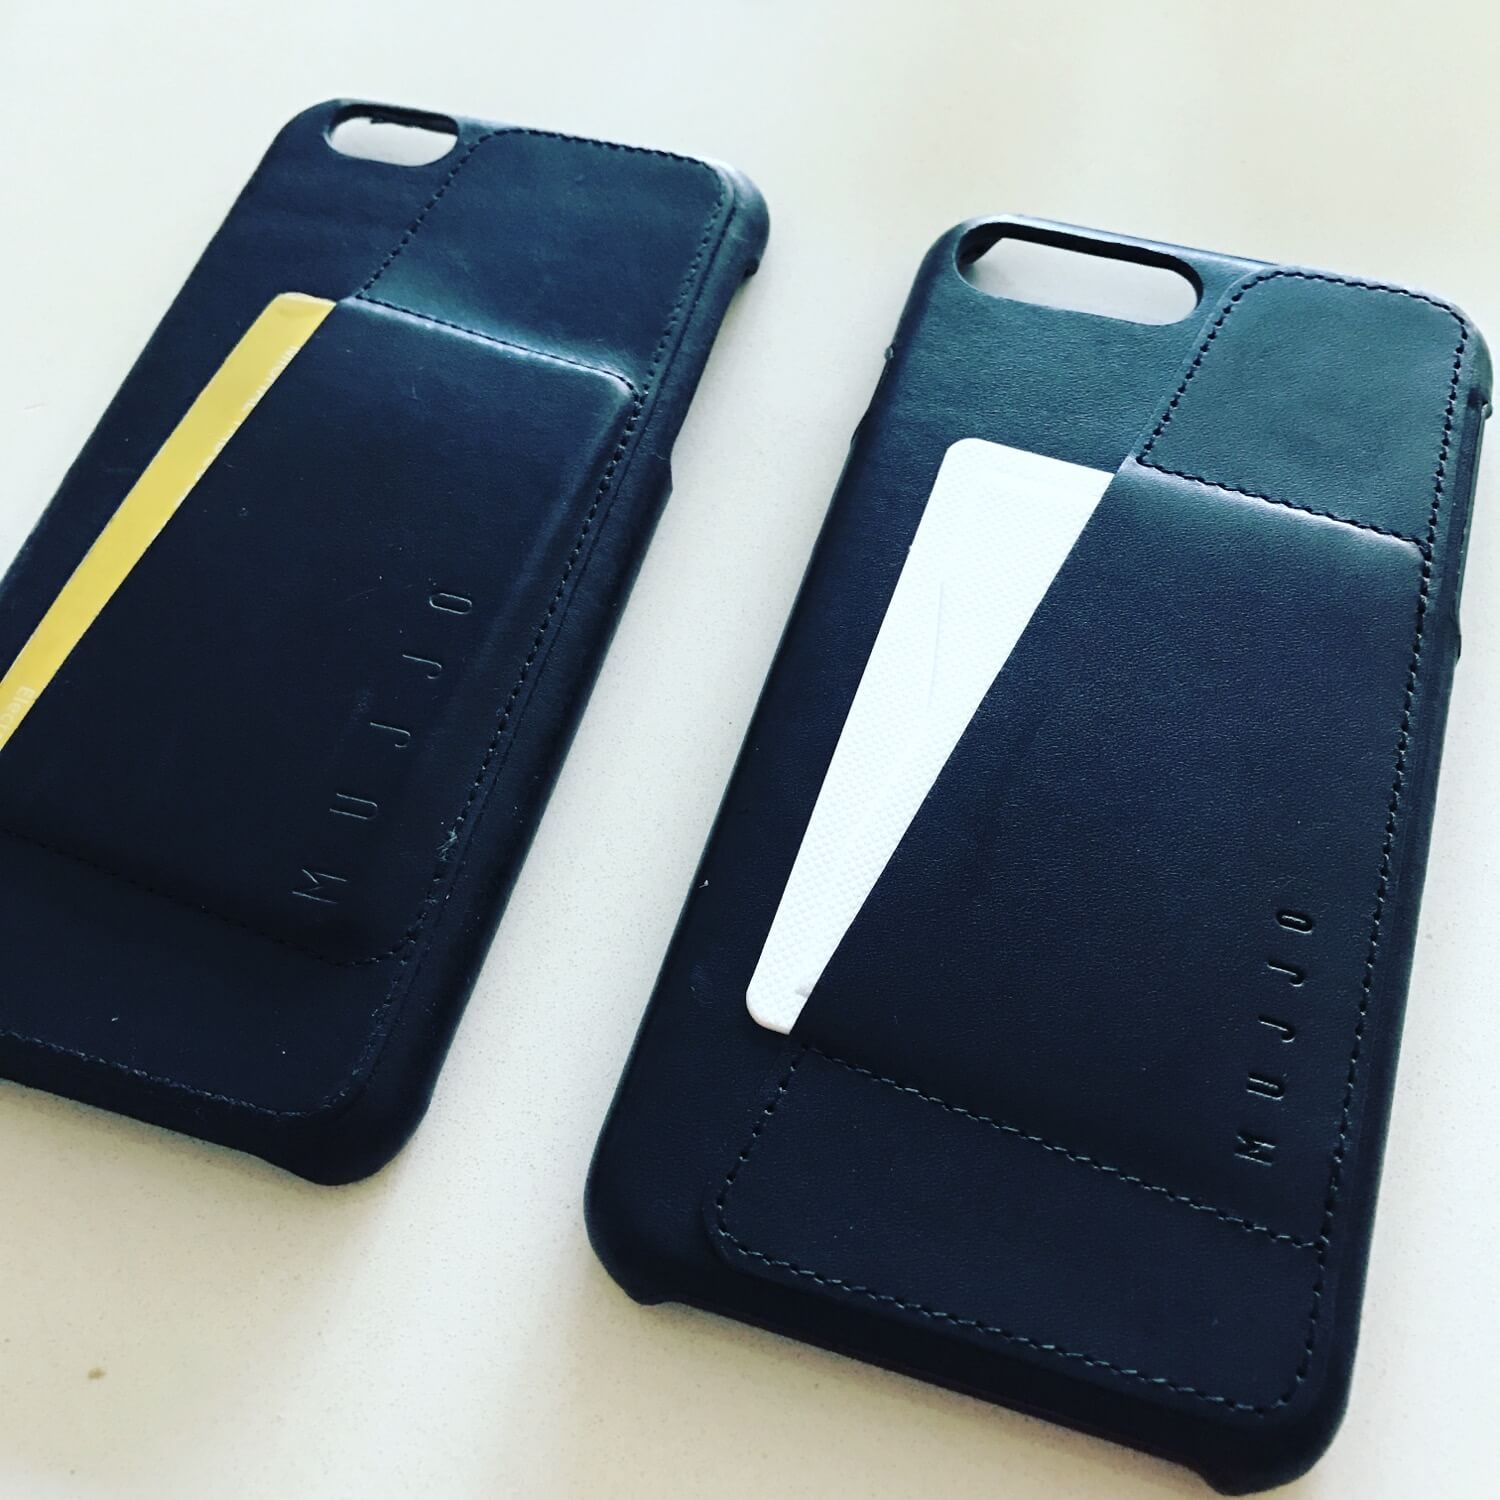 iWallet - an iPhone minimalist wallet that has been with me for the past 9 years! 6